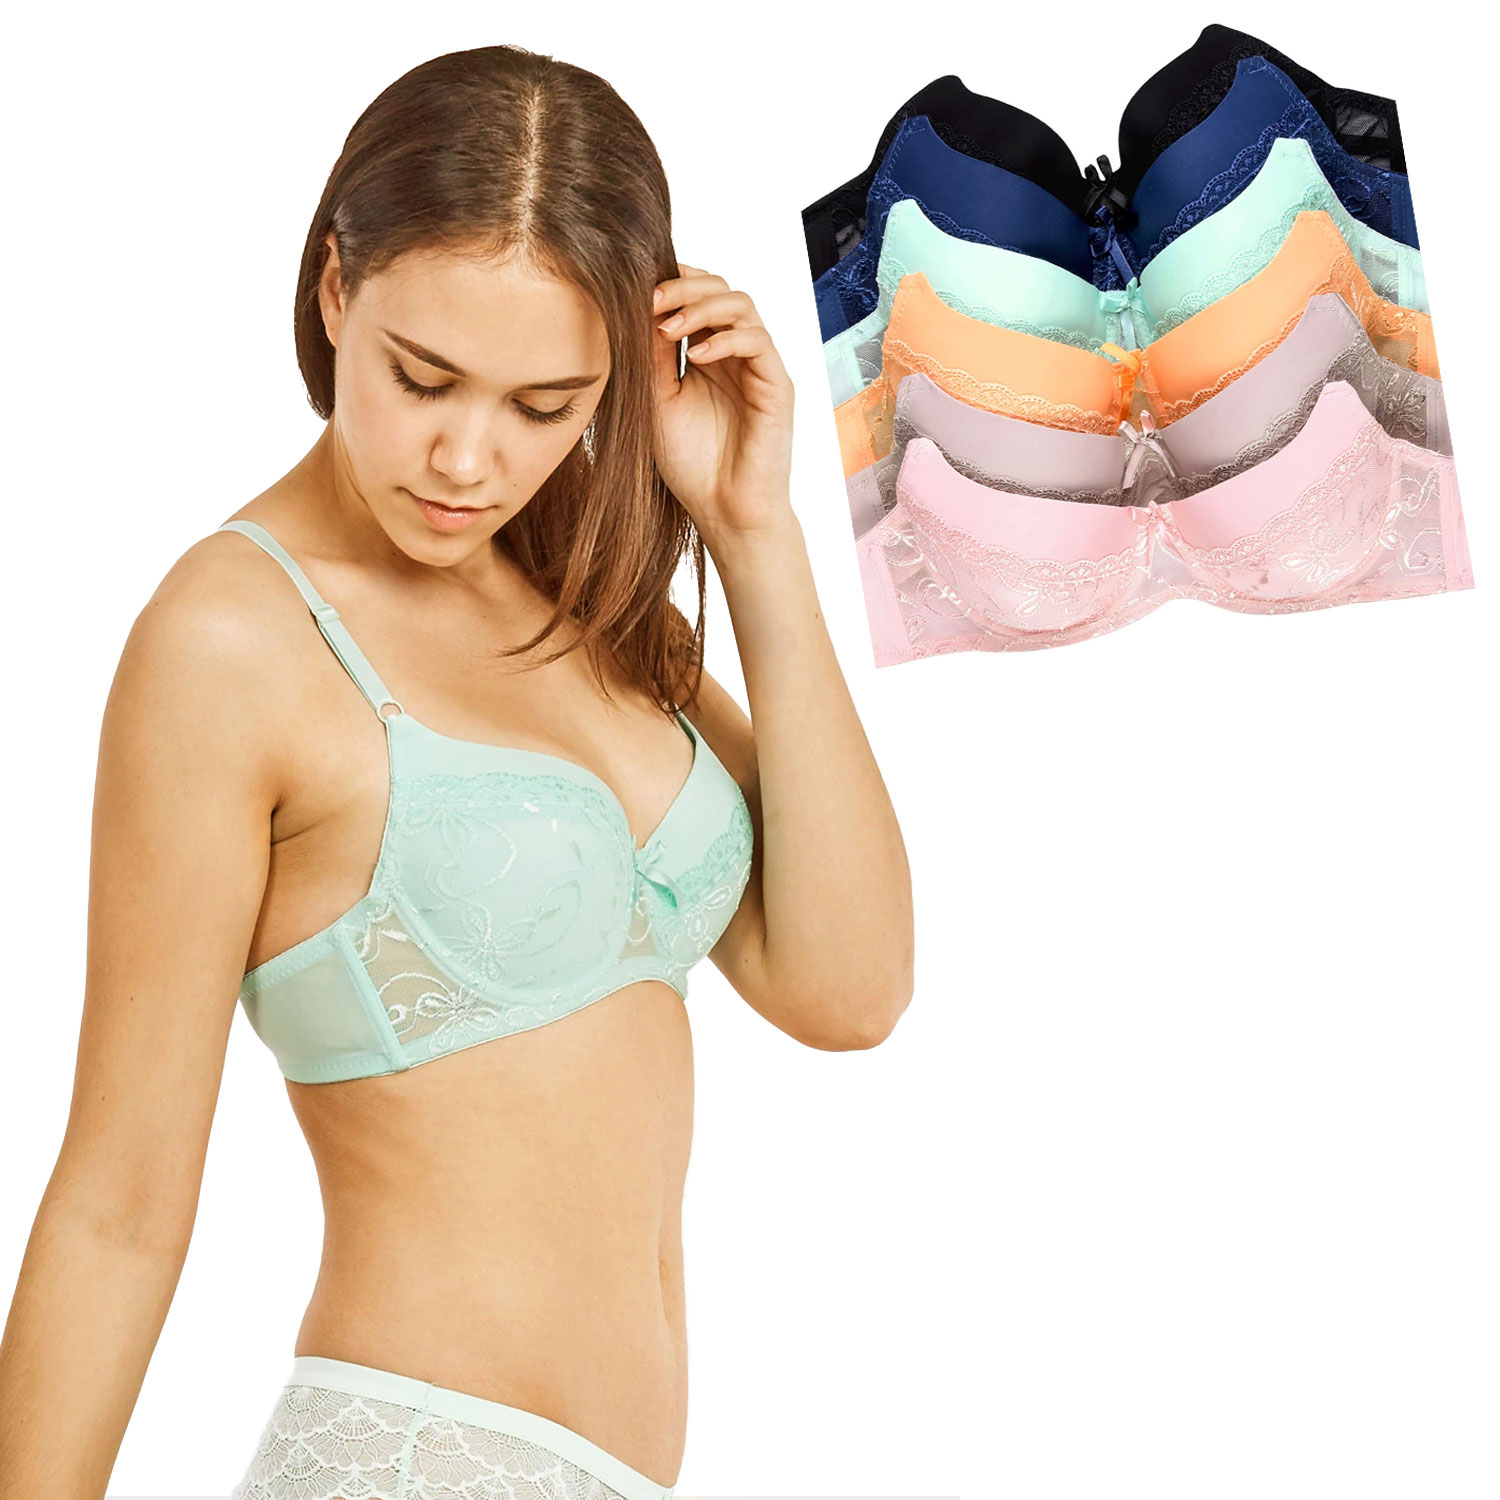  6 Pack Sofra Ladies Full Cup Plain Lace Bra